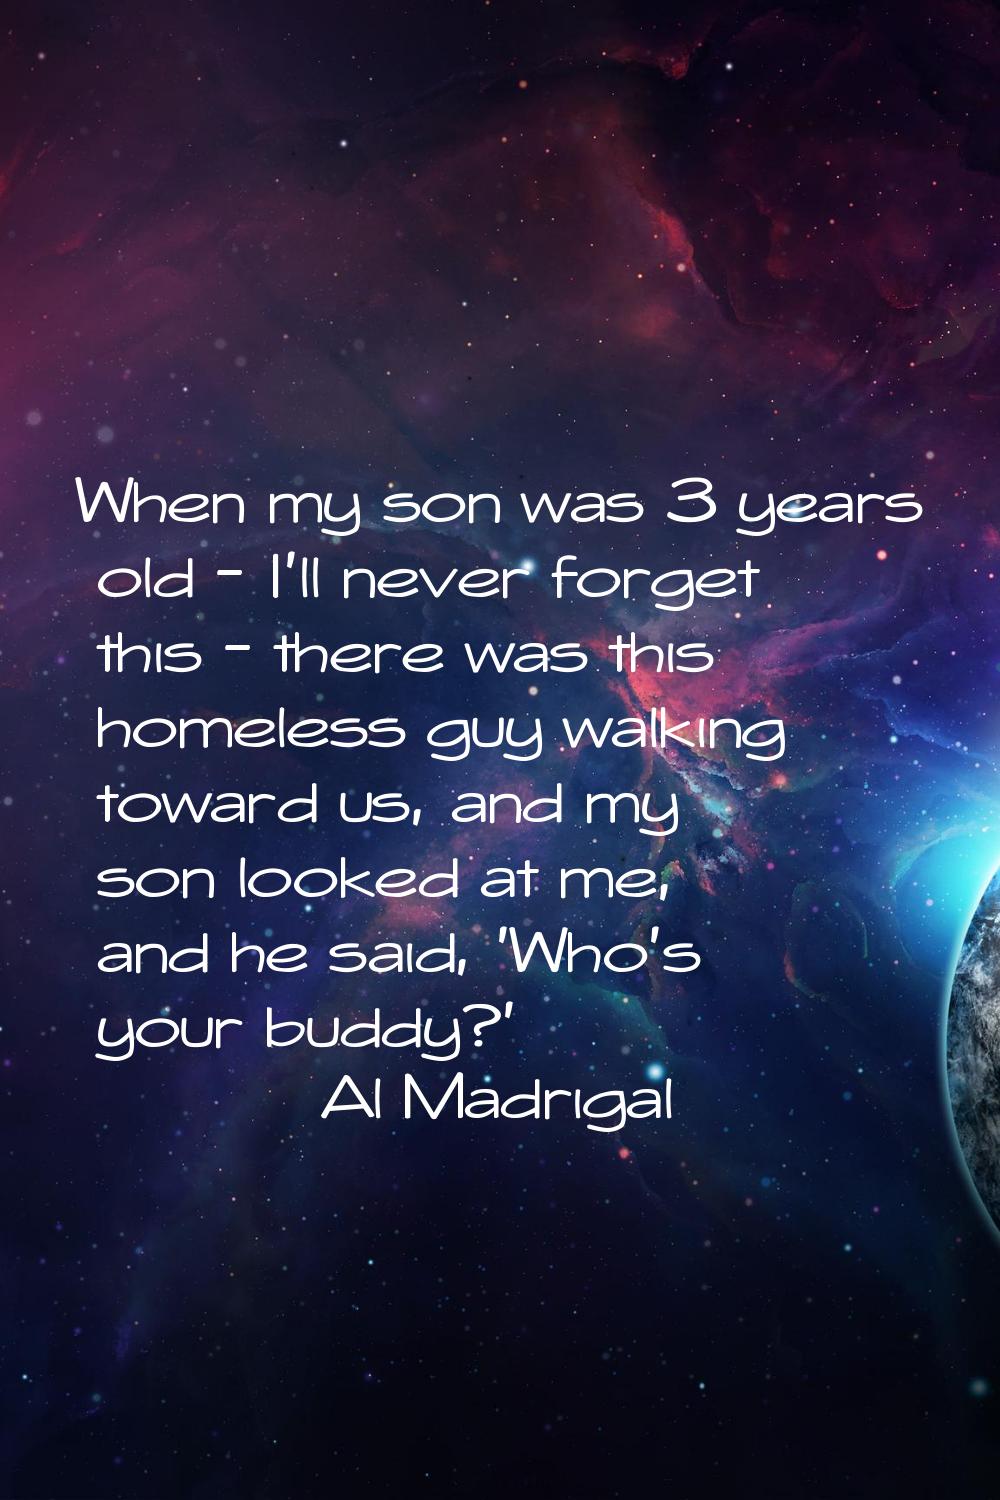 When my son was 3 years old - I'll never forget this - there was this homeless guy walking toward u